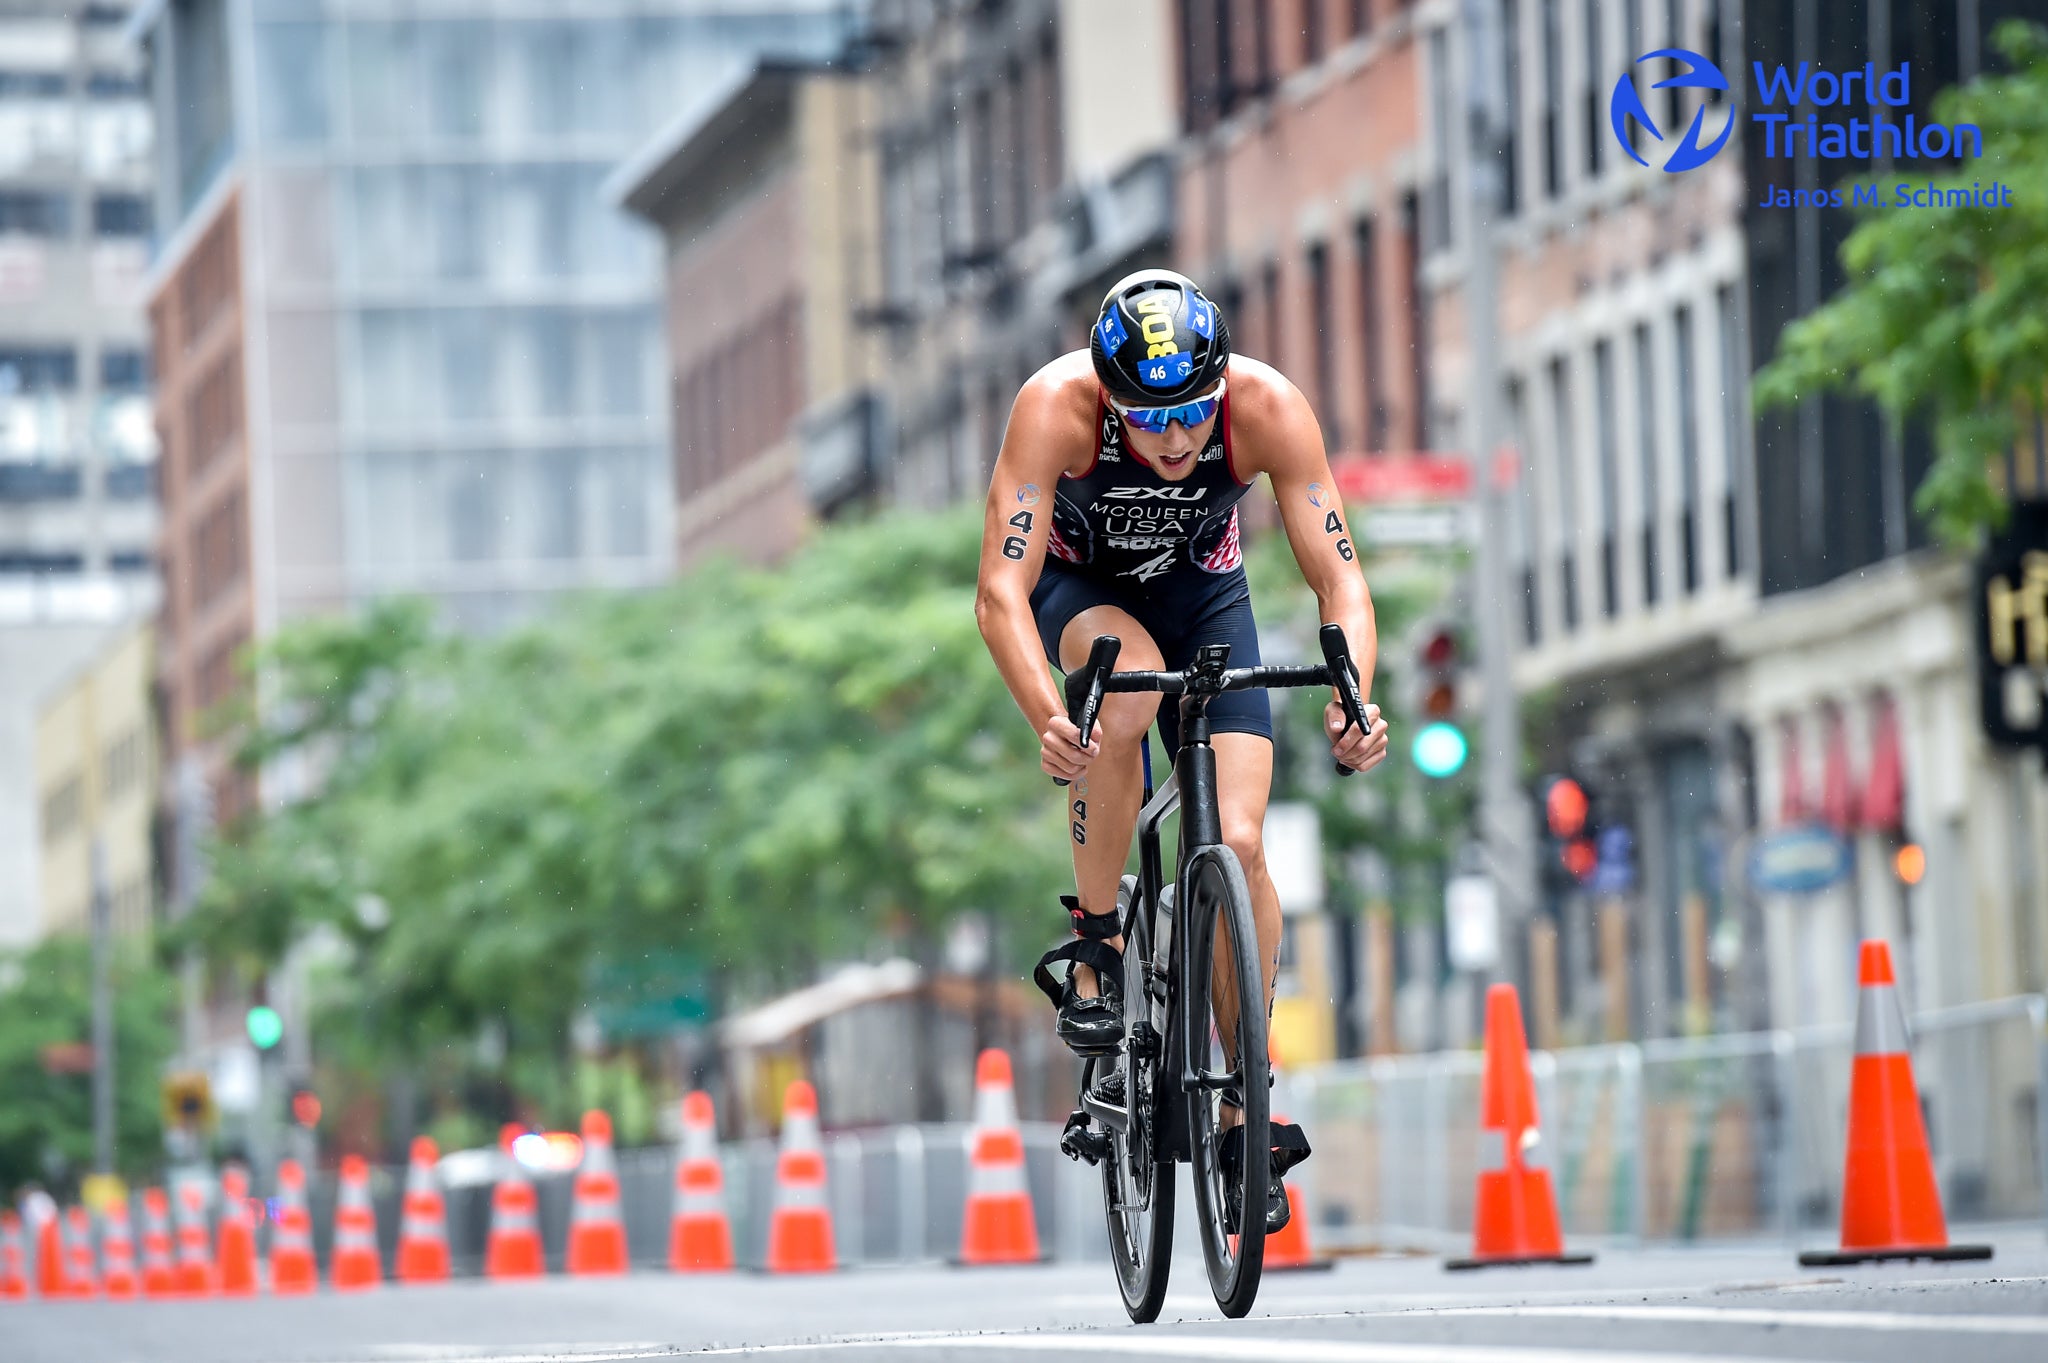 Chase McQueen is a solid contender for Team USA triathlon at Paris 2024.